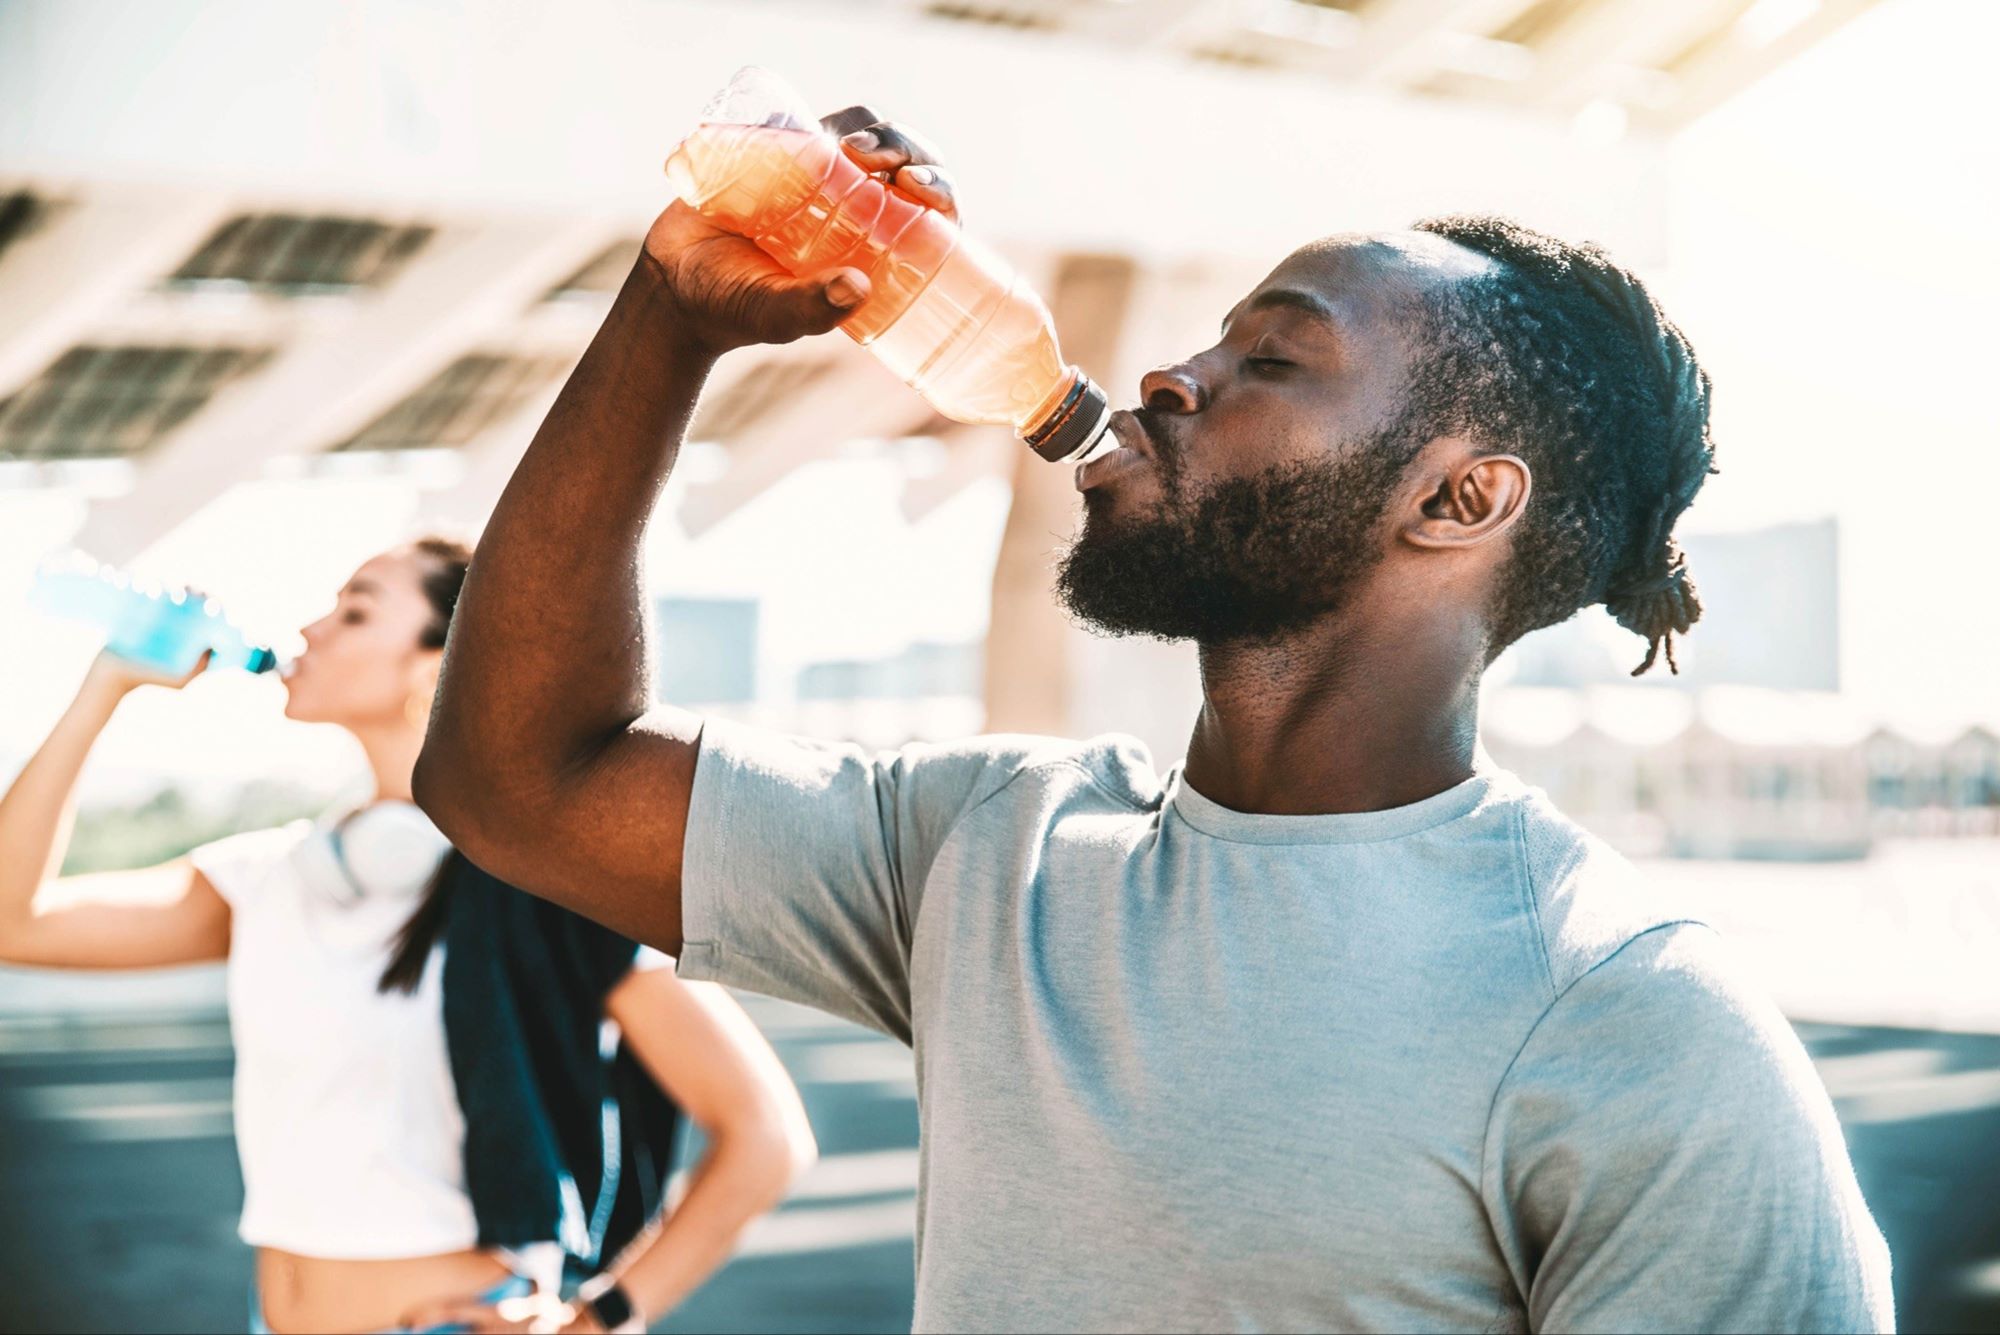 What Is The Best Type Of Beverage To Drink During Exercise